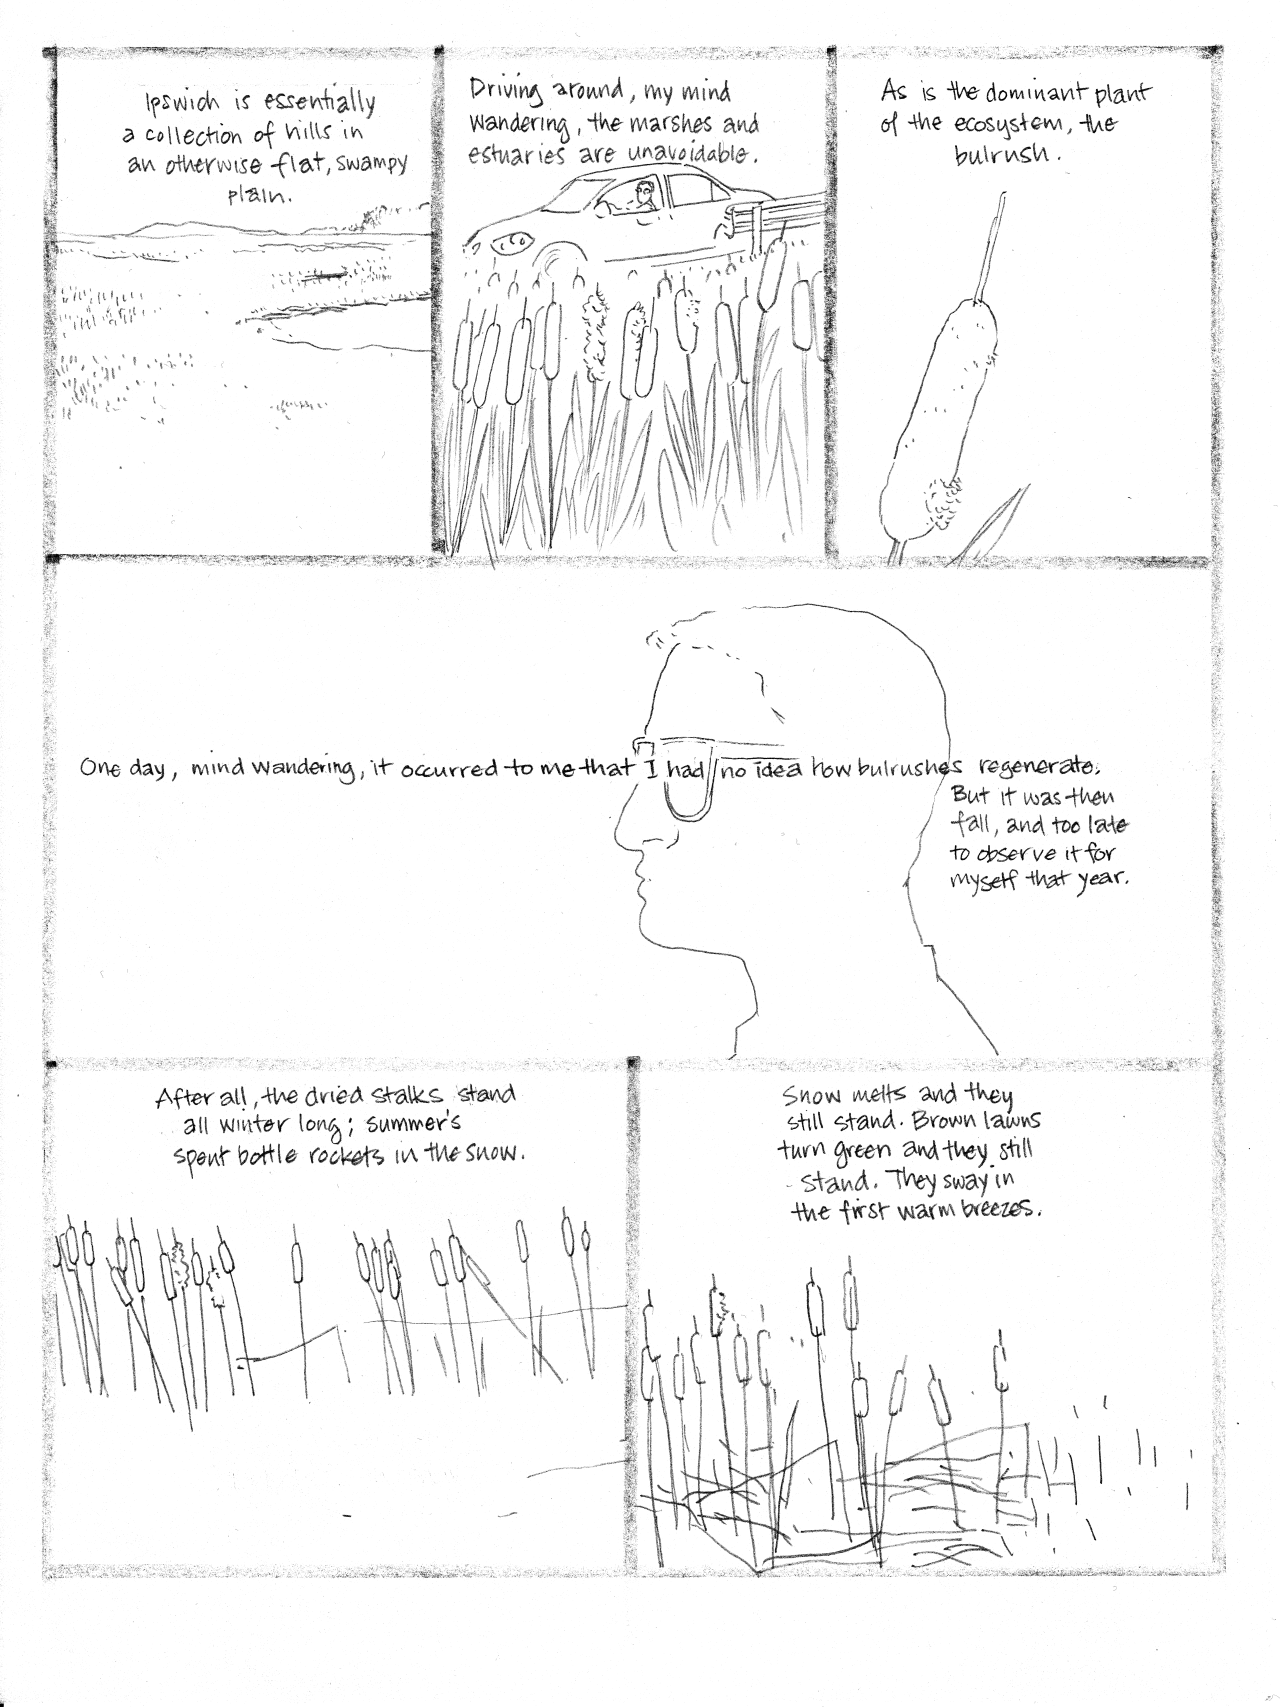 In Pieces: Someplace Which I Call Home (2/4) - Page 1